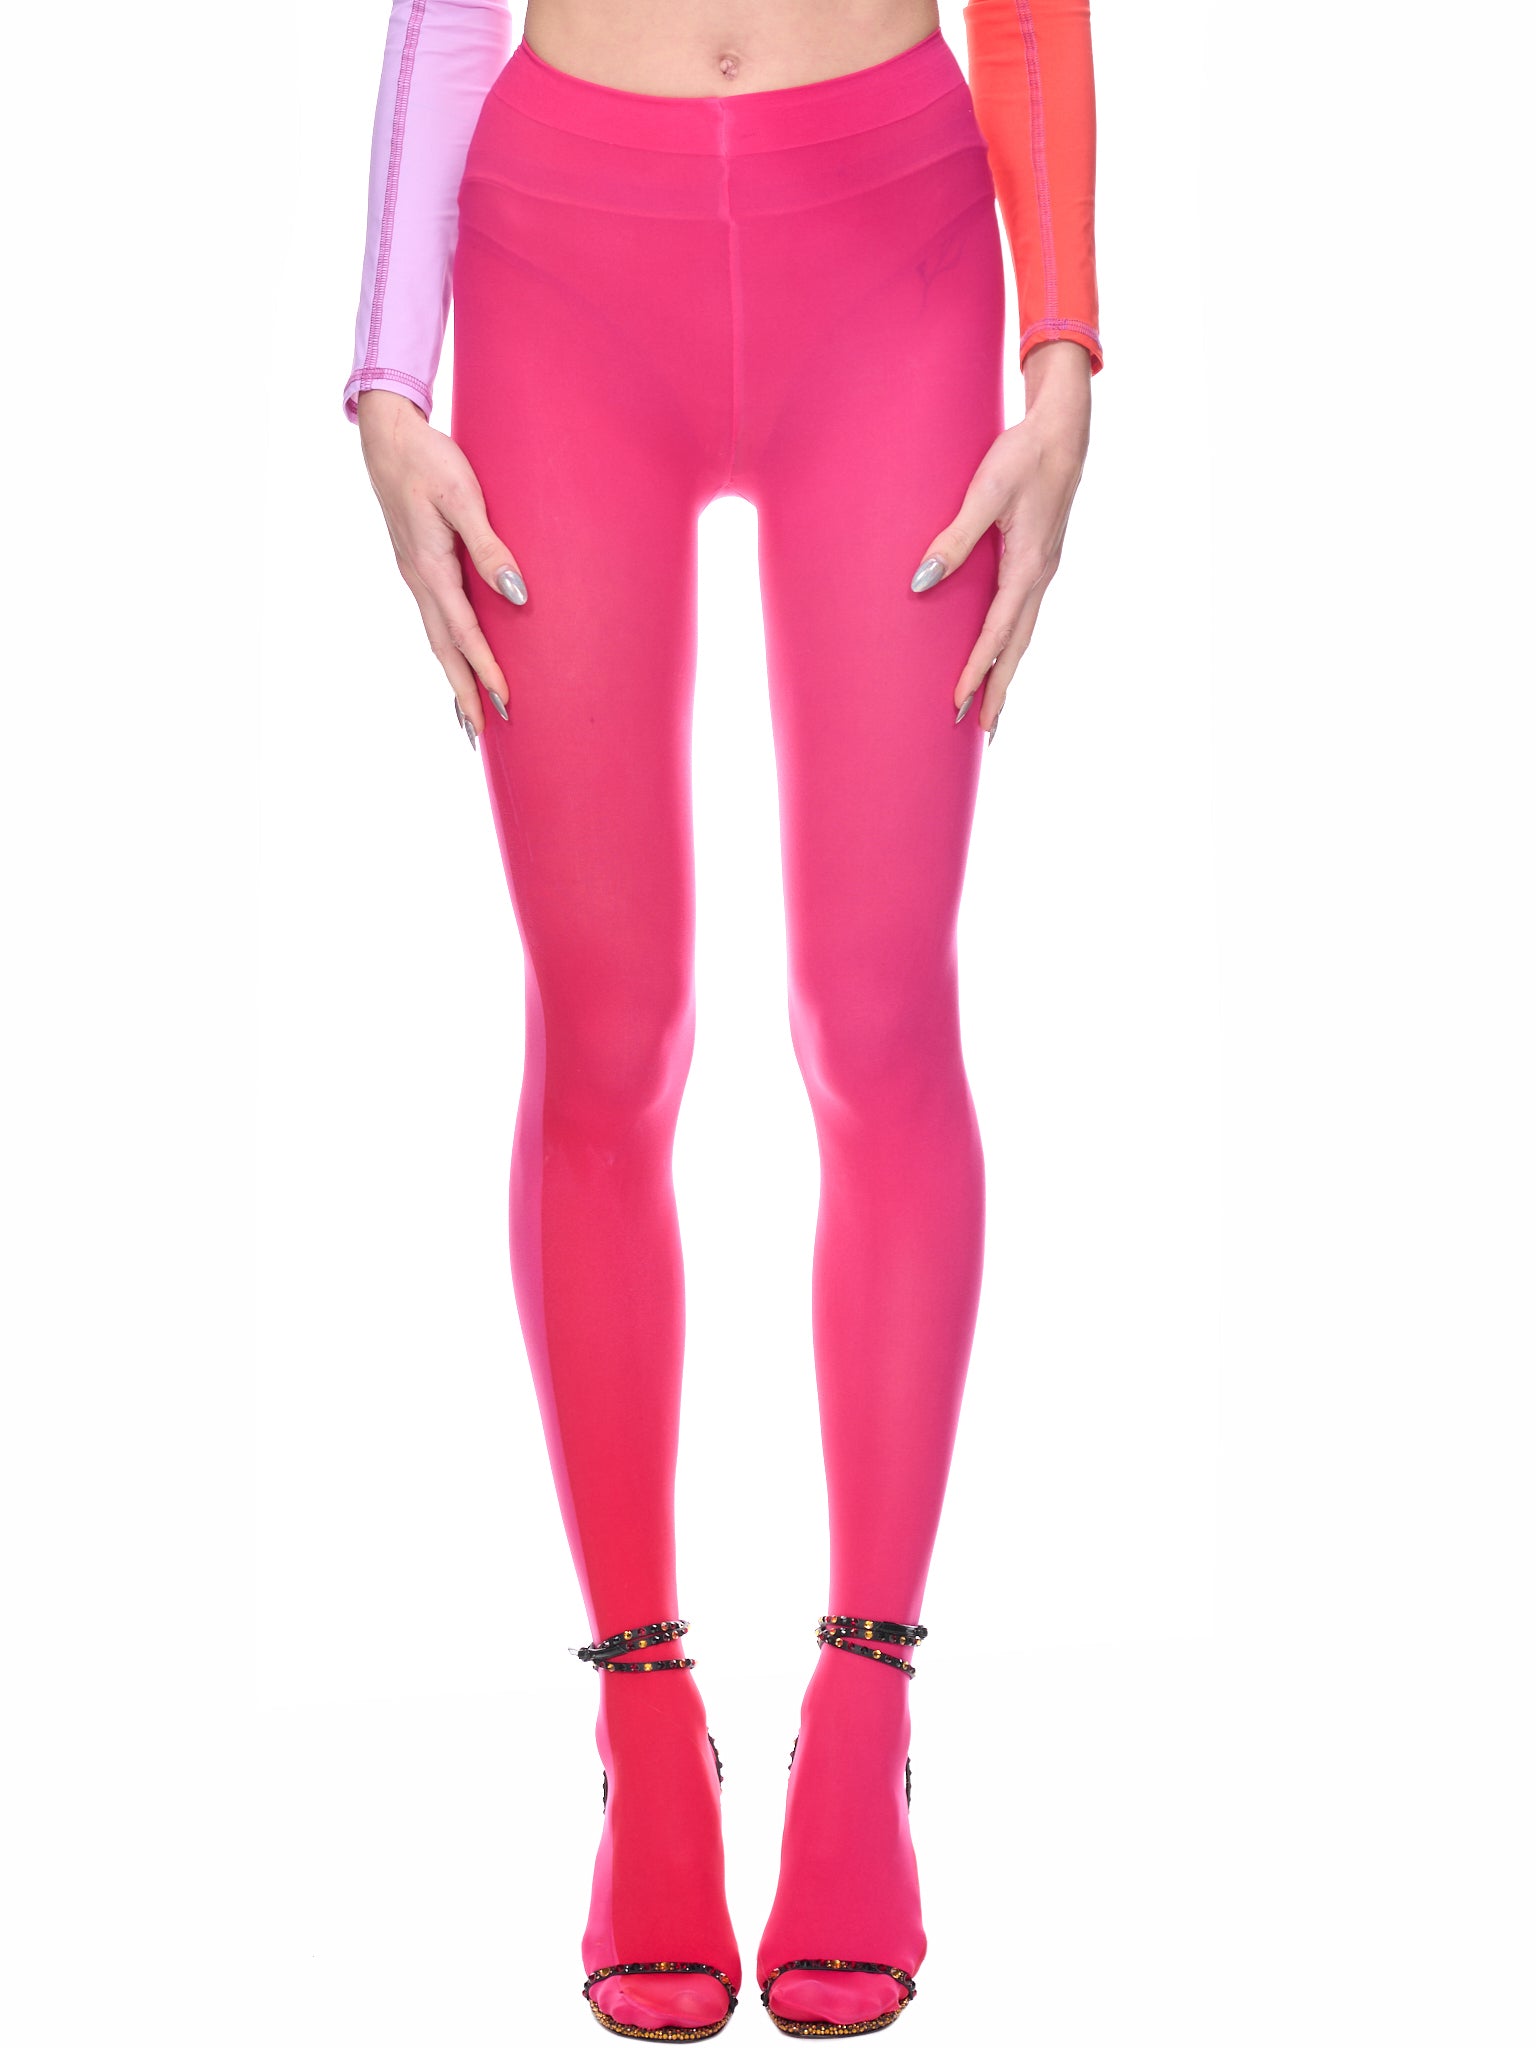 Light Pink Footless Performance Tights Leggings Style# 1047